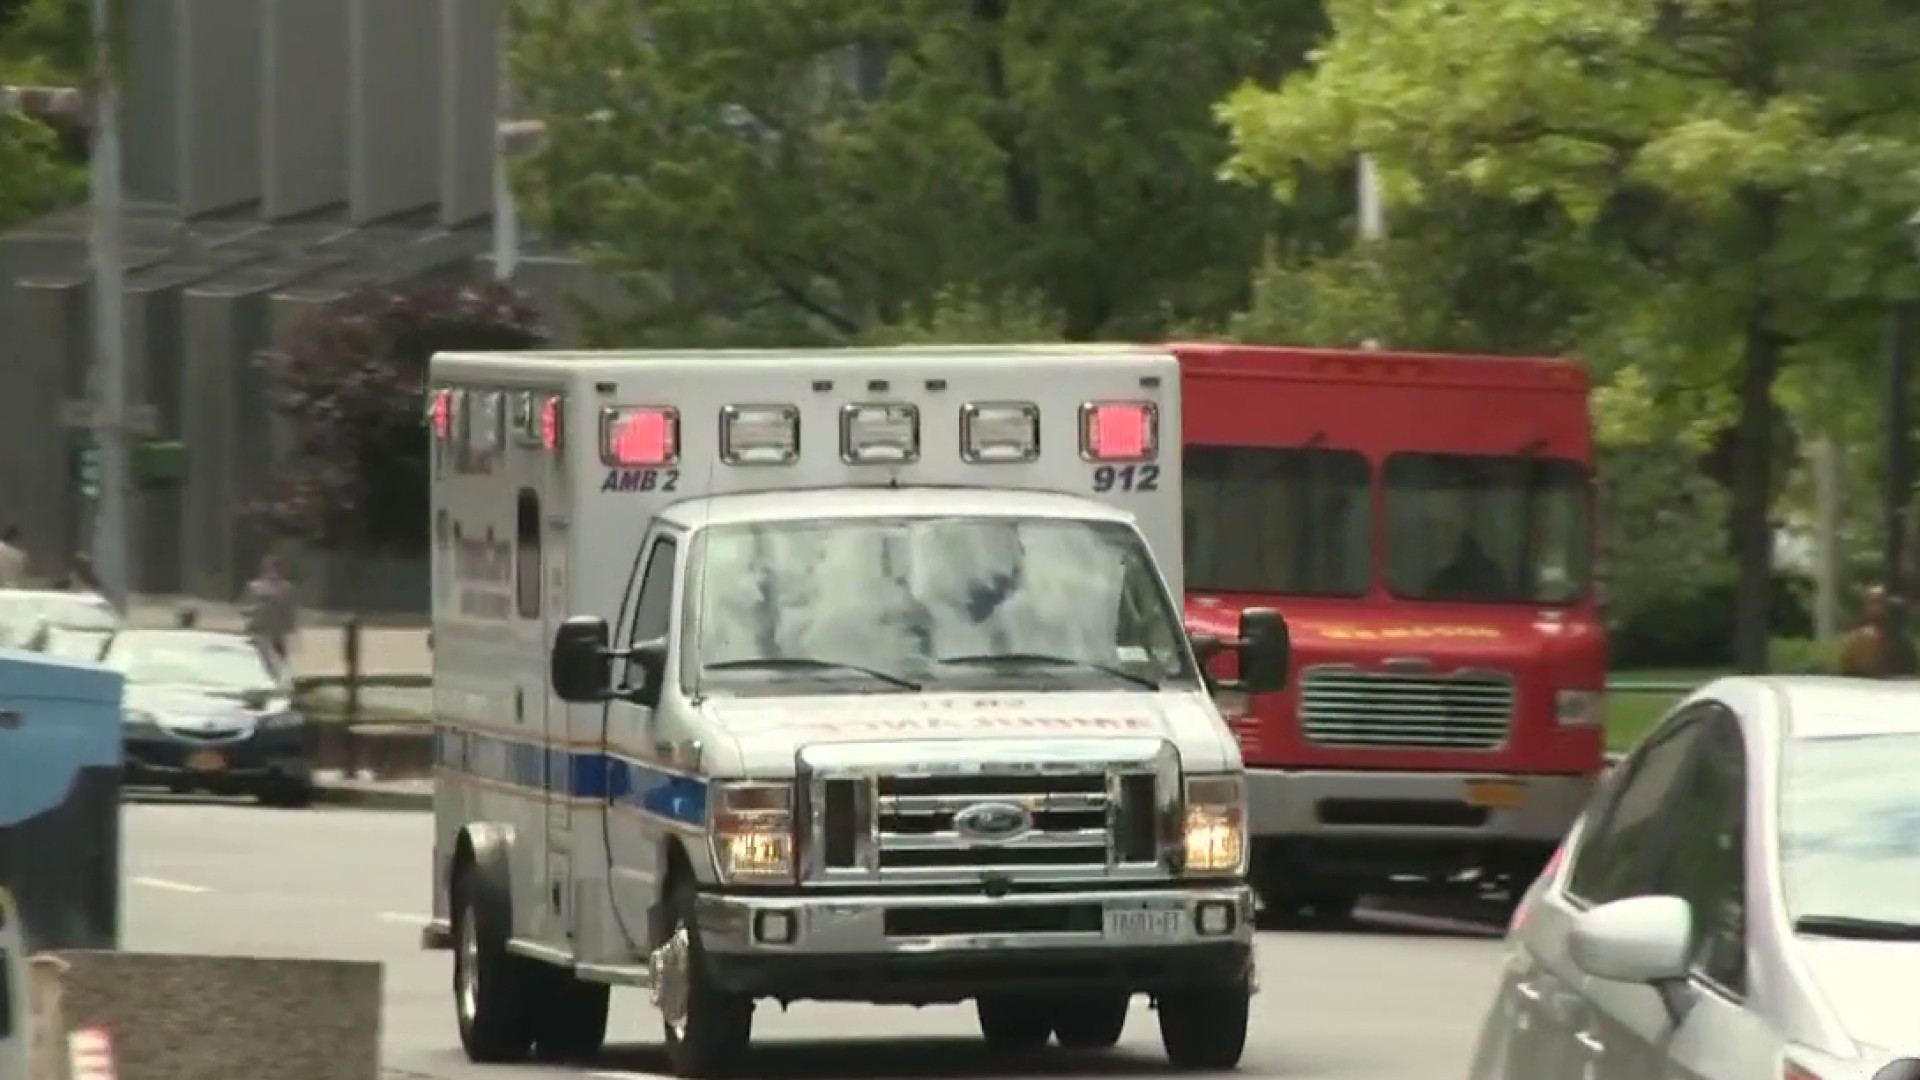 Protecting Consumers from Surprise Ambulance Bills